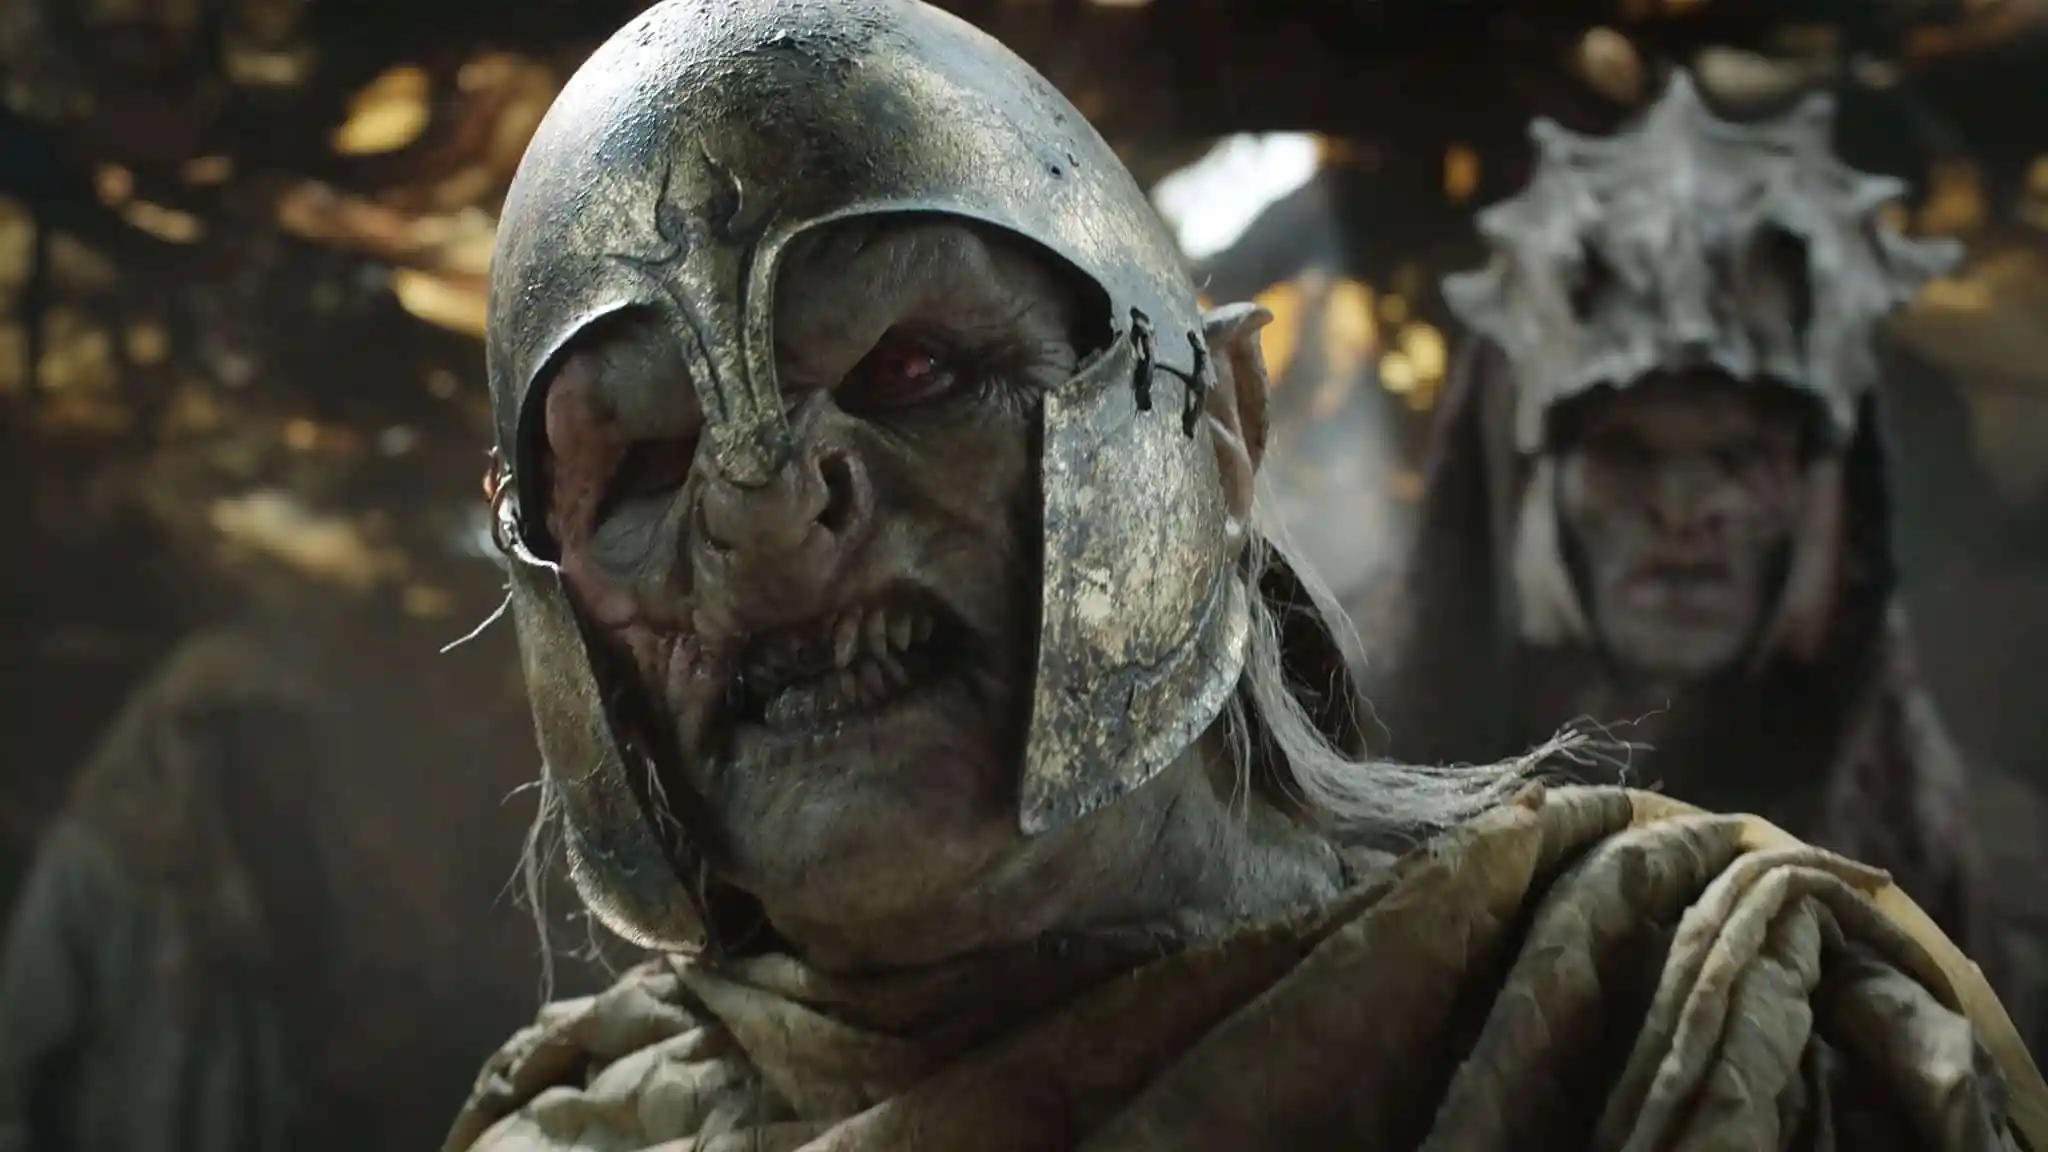 Orc from The Lord of the Rings: The Rings of Power